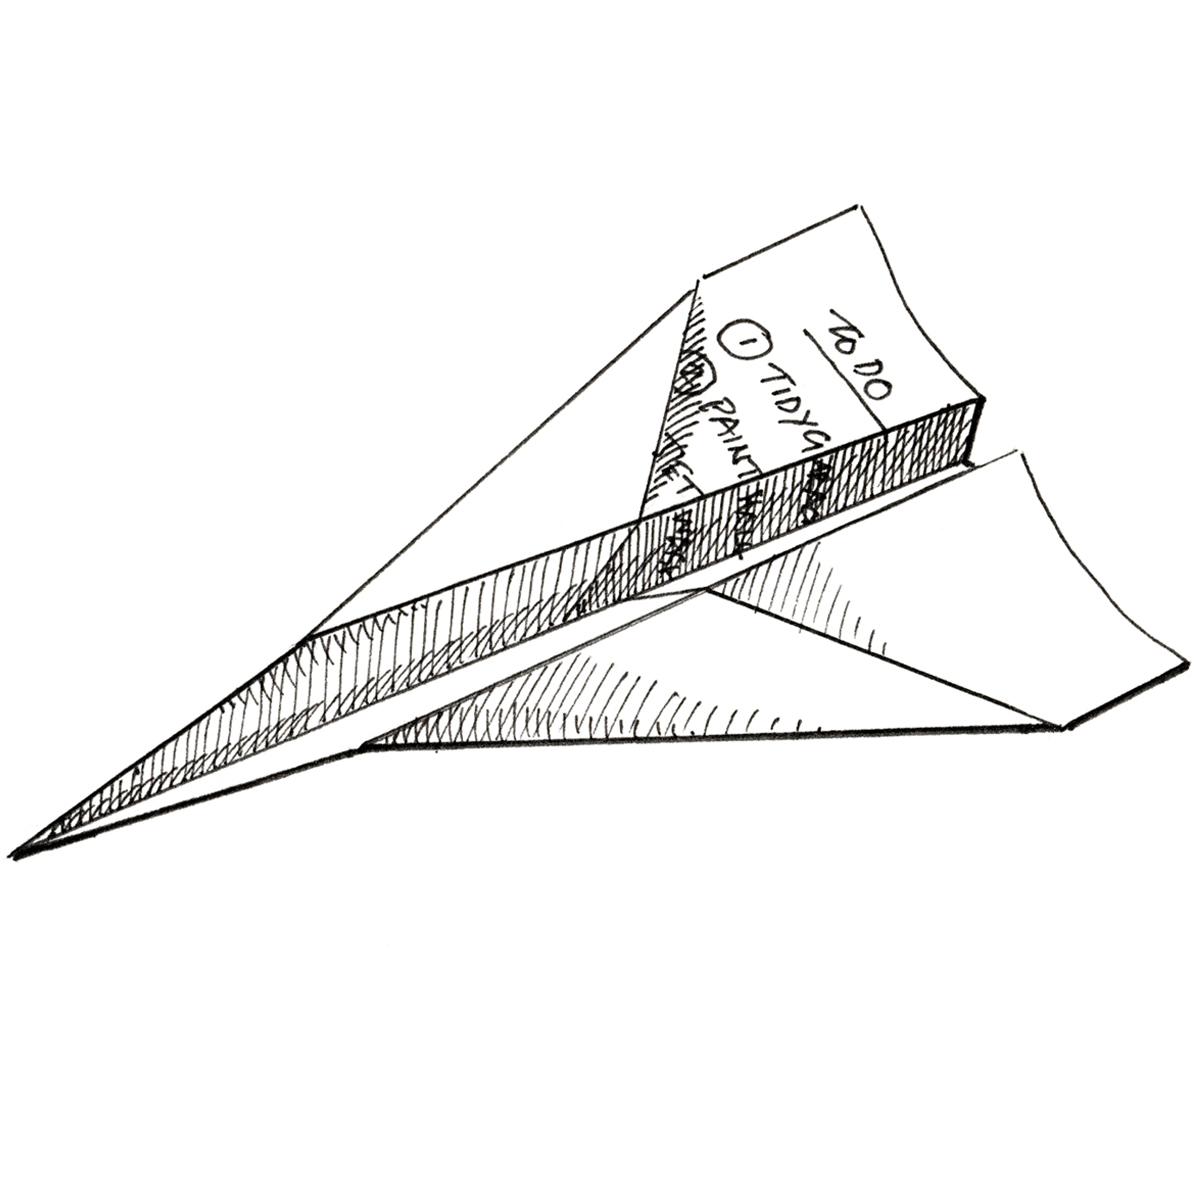 Limited edition print from a pen and ink drawing of a to-do list folded into a paper aeroplane